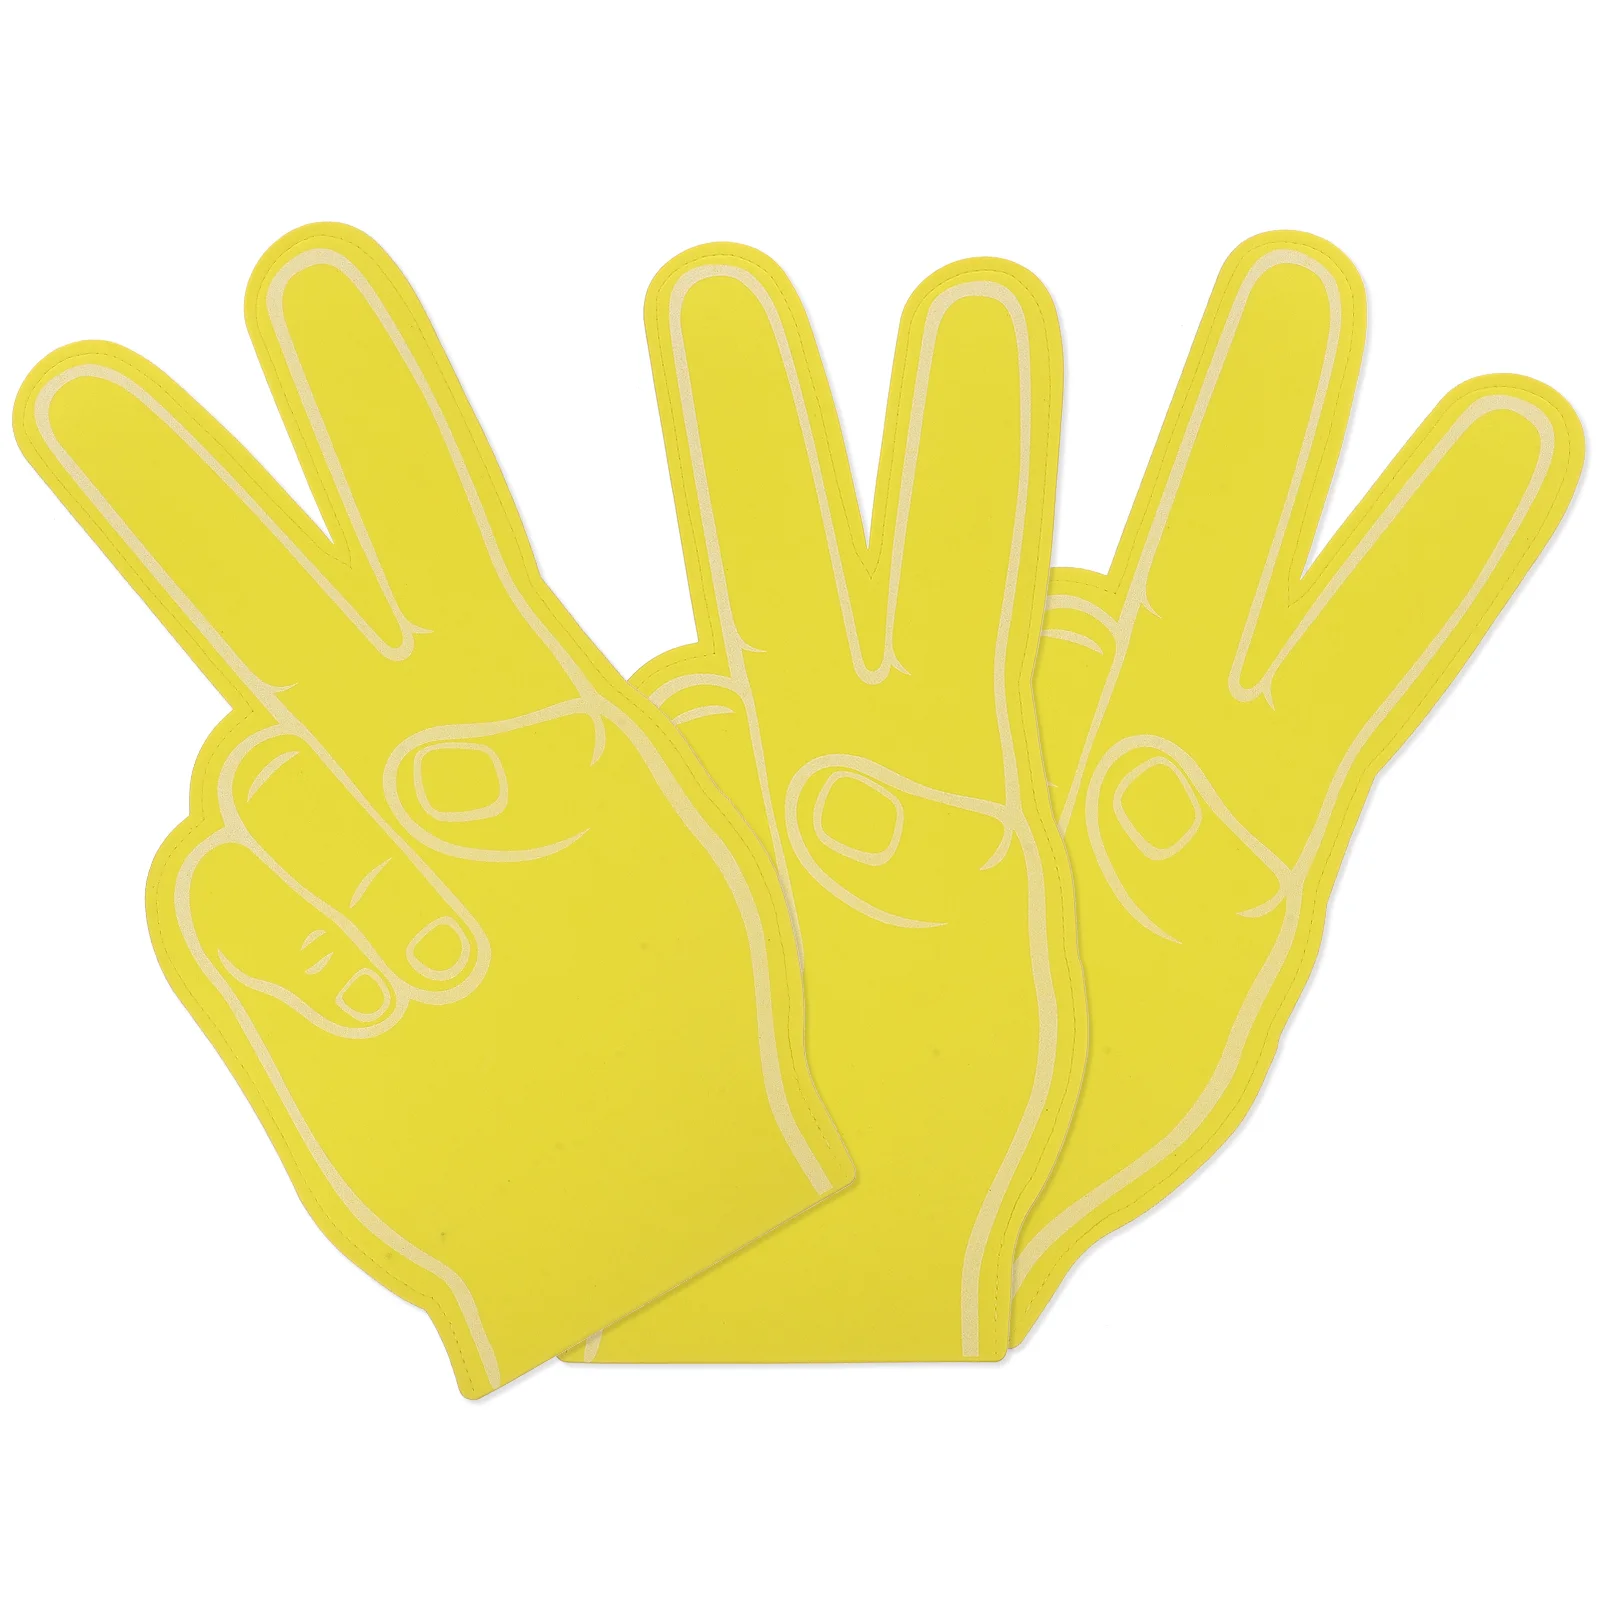 

Foam Fingers Pom Poms Cheer Cheerleader Girls Cheerleading Gifts Party Supplies Noise Makers Stuff Props Football Toys